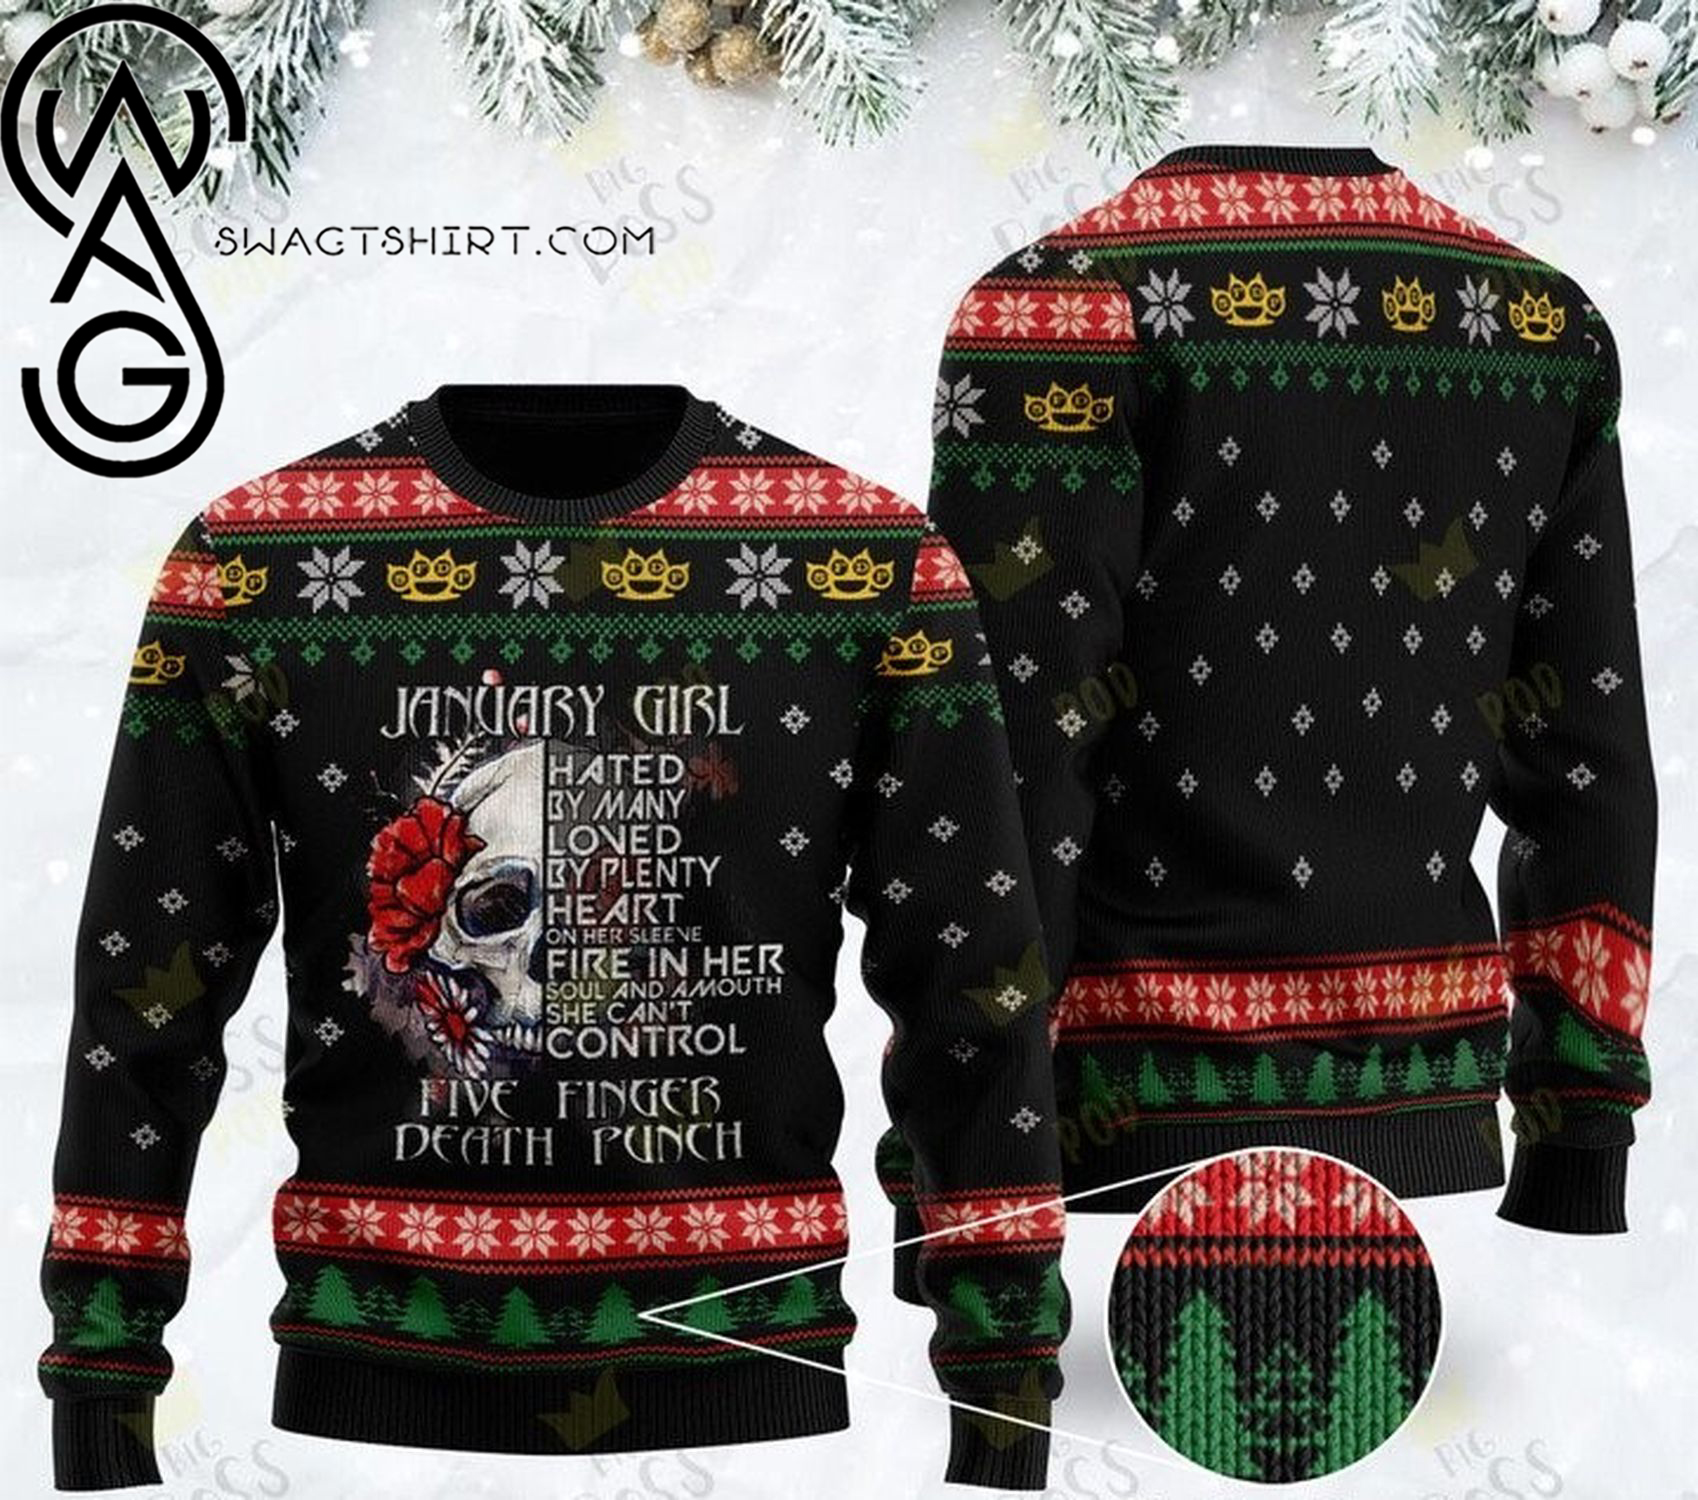 January girl five finger death punch ugly christmas sweater - Copy (2)